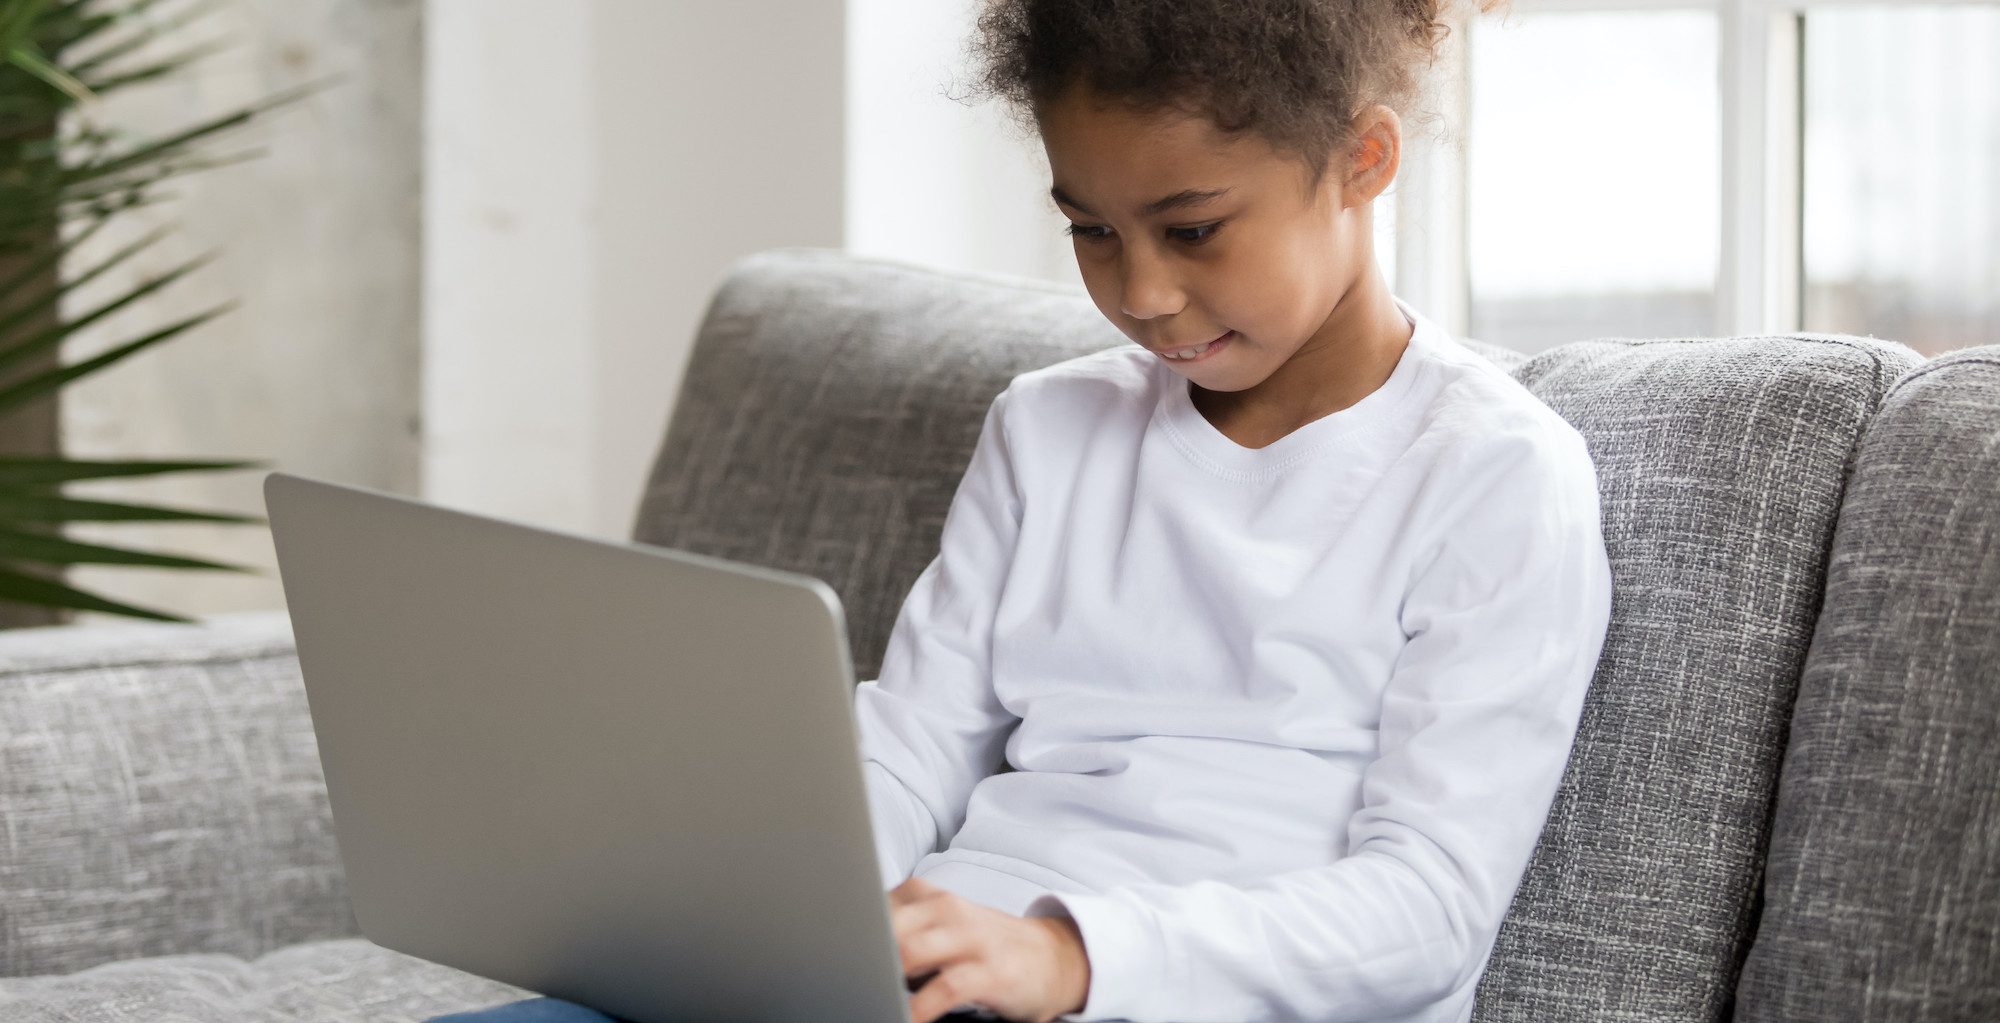 Curious preschool african mixed race girl using laptop on couch, little smart black kid typing on computer chatting with friends online alone at home, child security, children and gadget concept